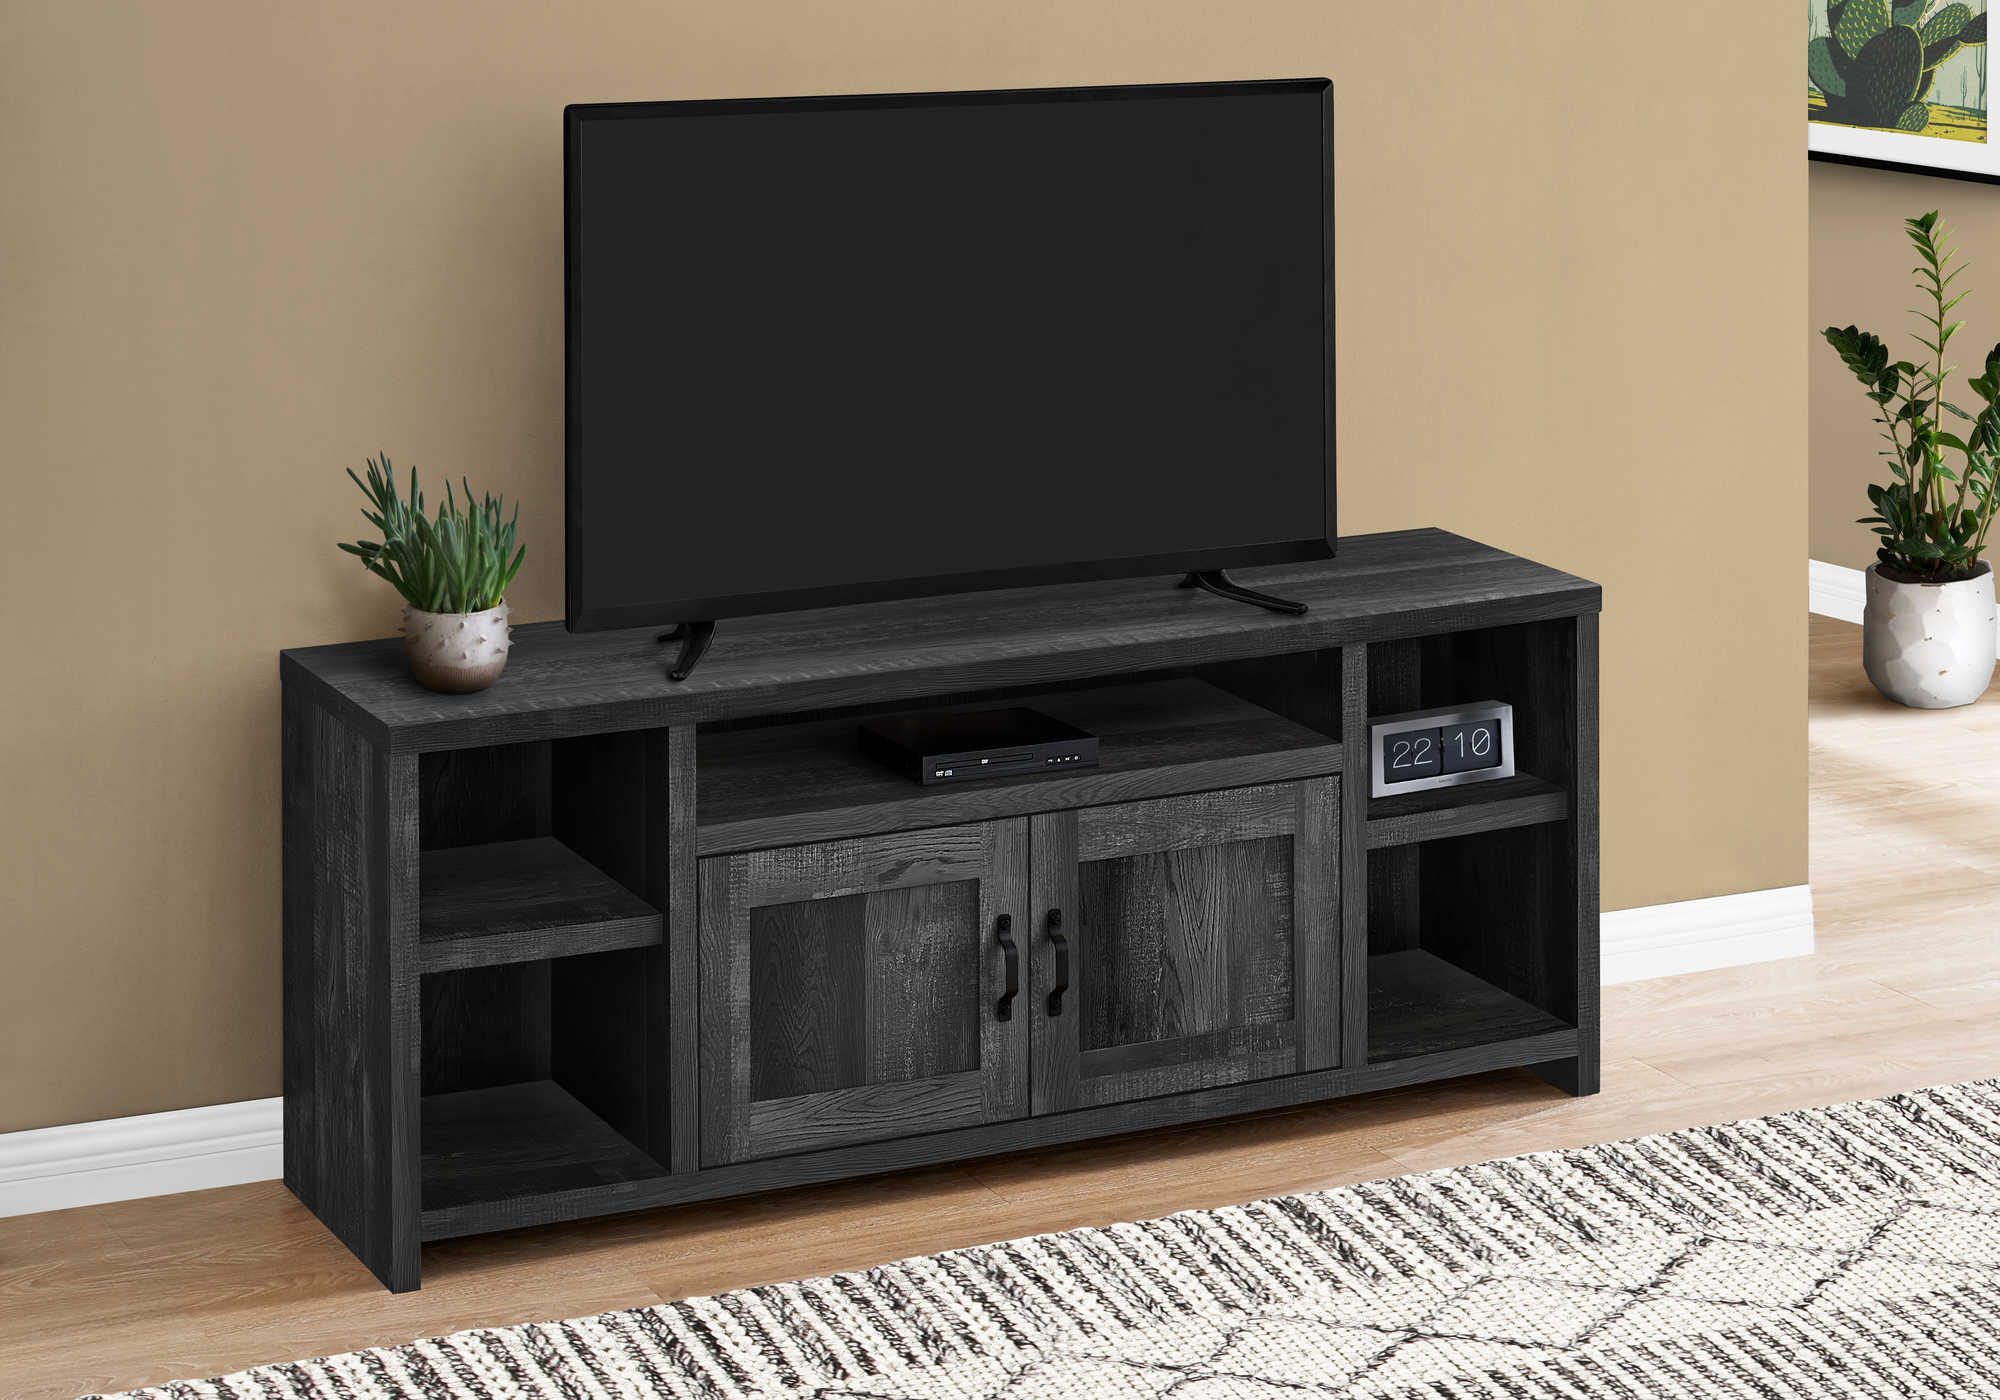 TV STAND - 60"L / BLACK RECLAIMED WOOD-LOOK